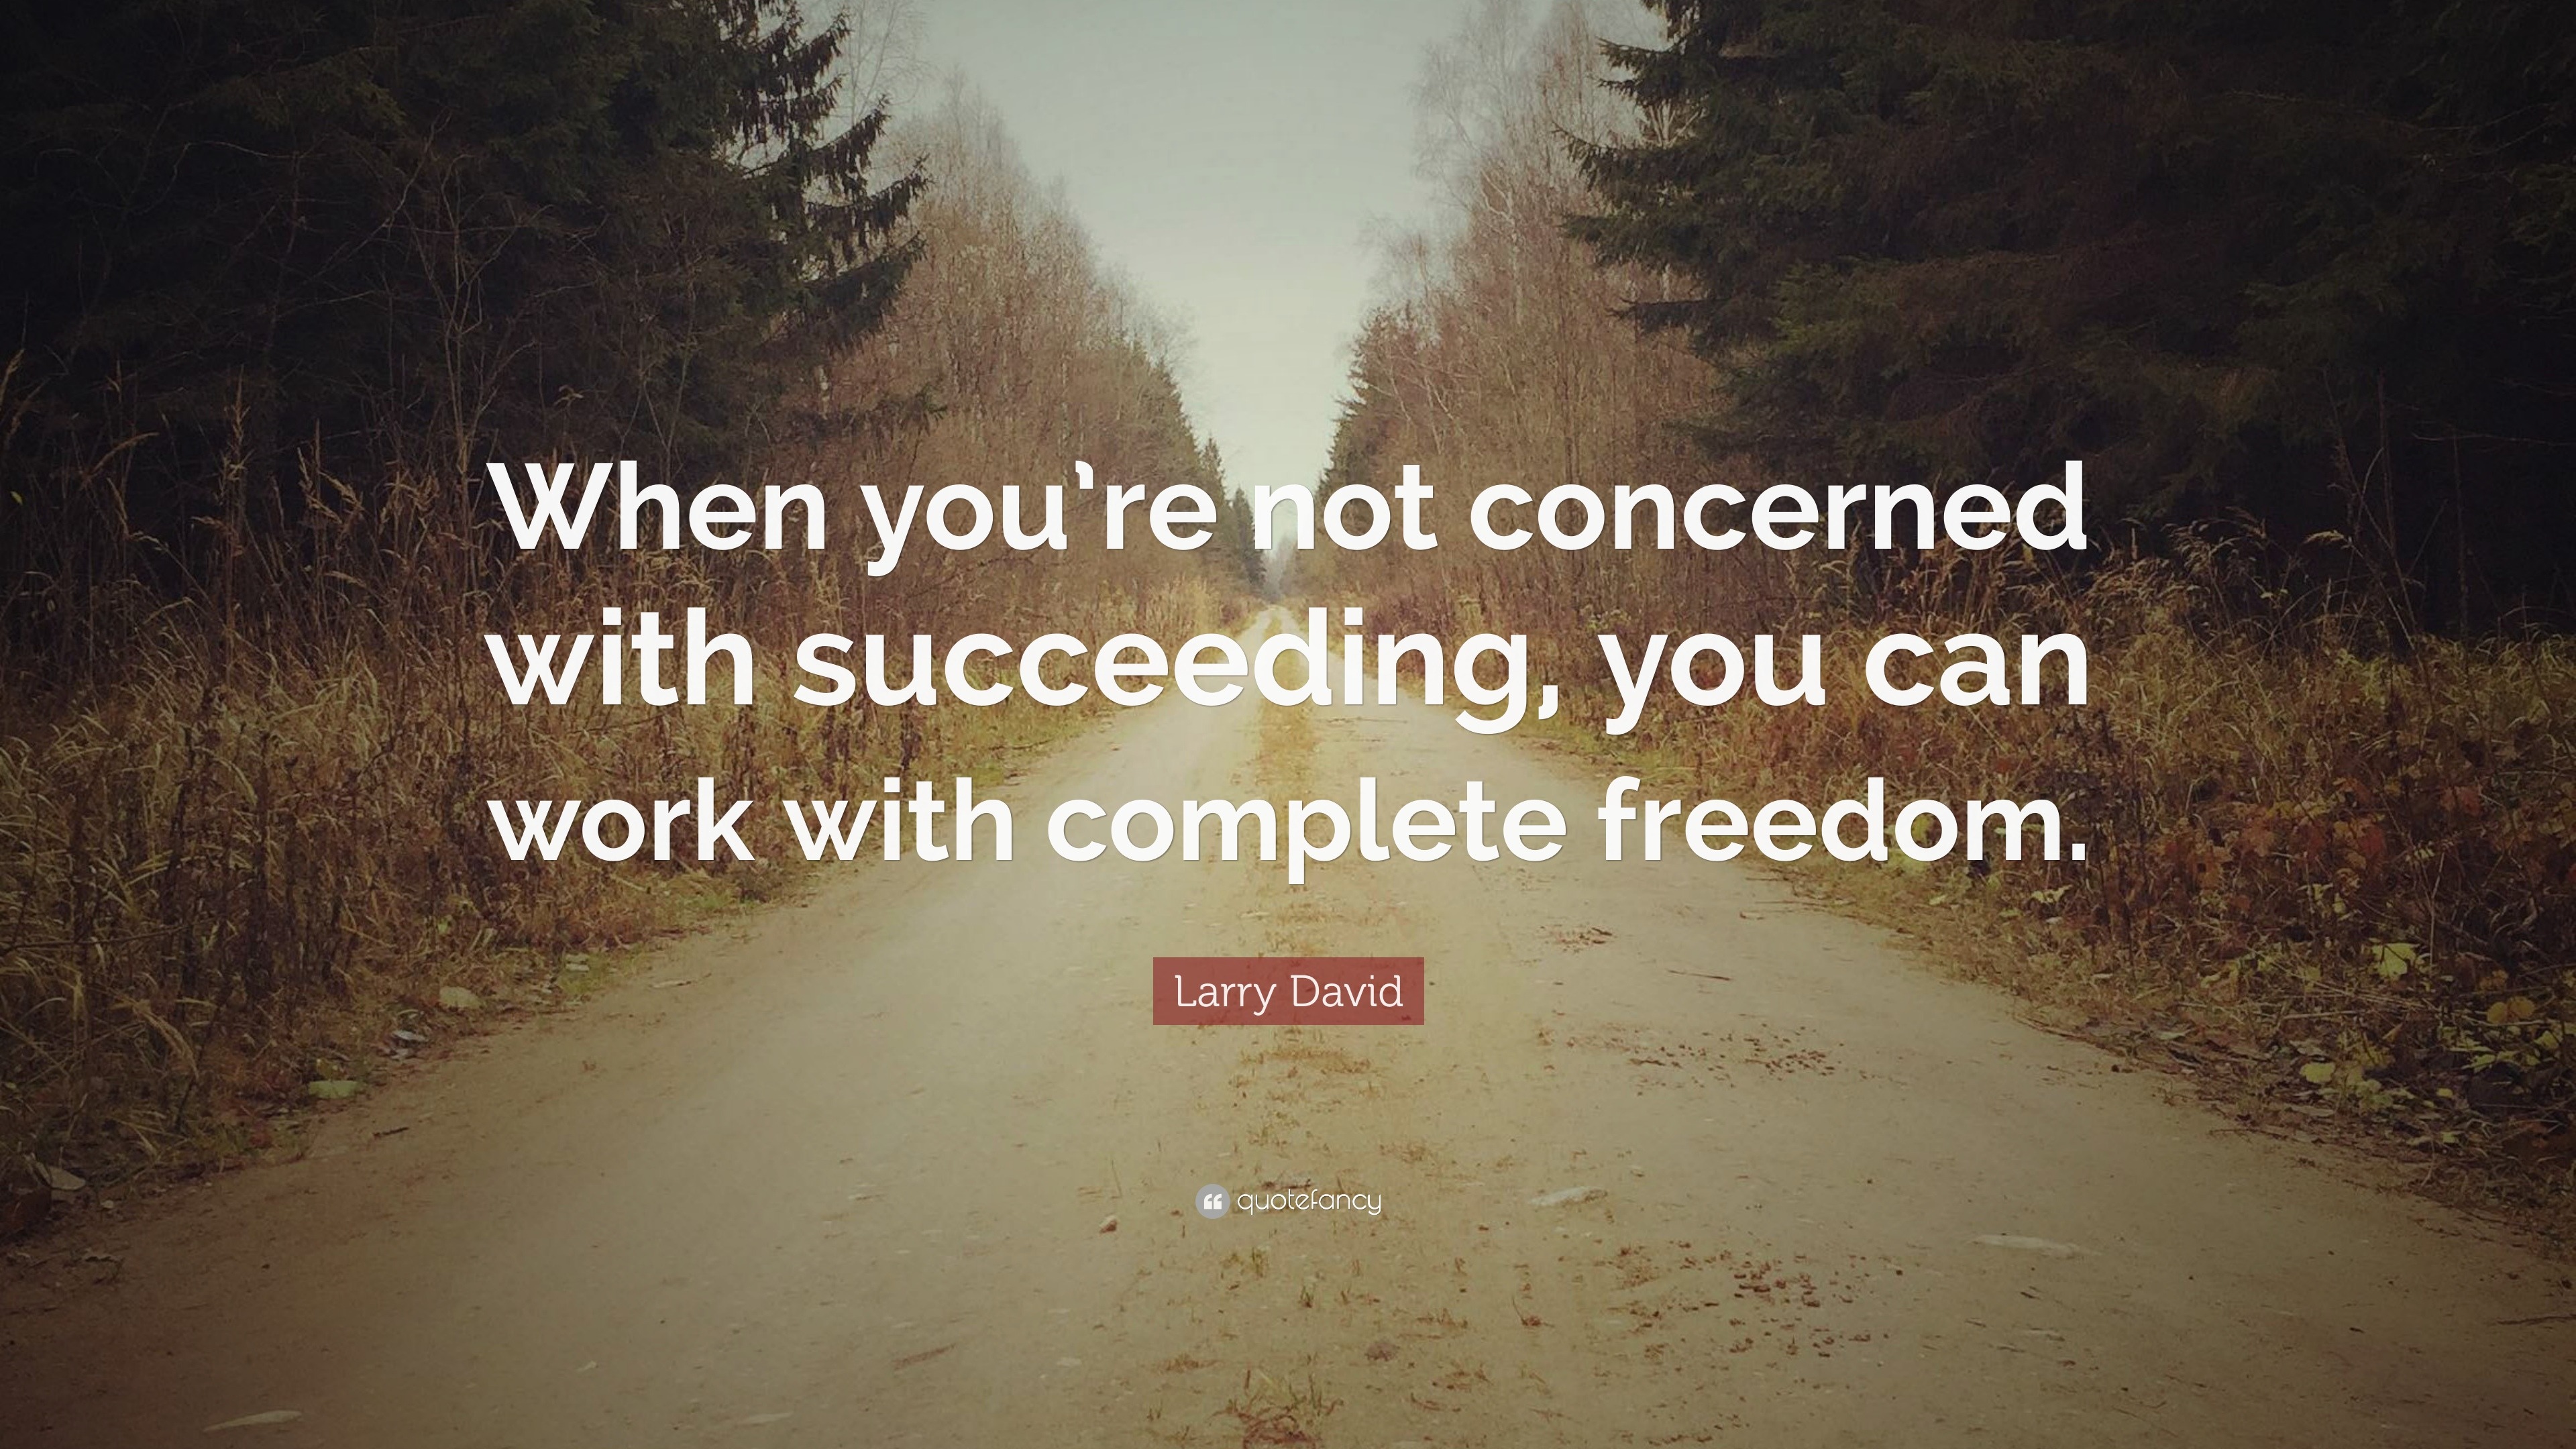 Larry David Quote: “When you’re not concerned with succeeding, you can ...